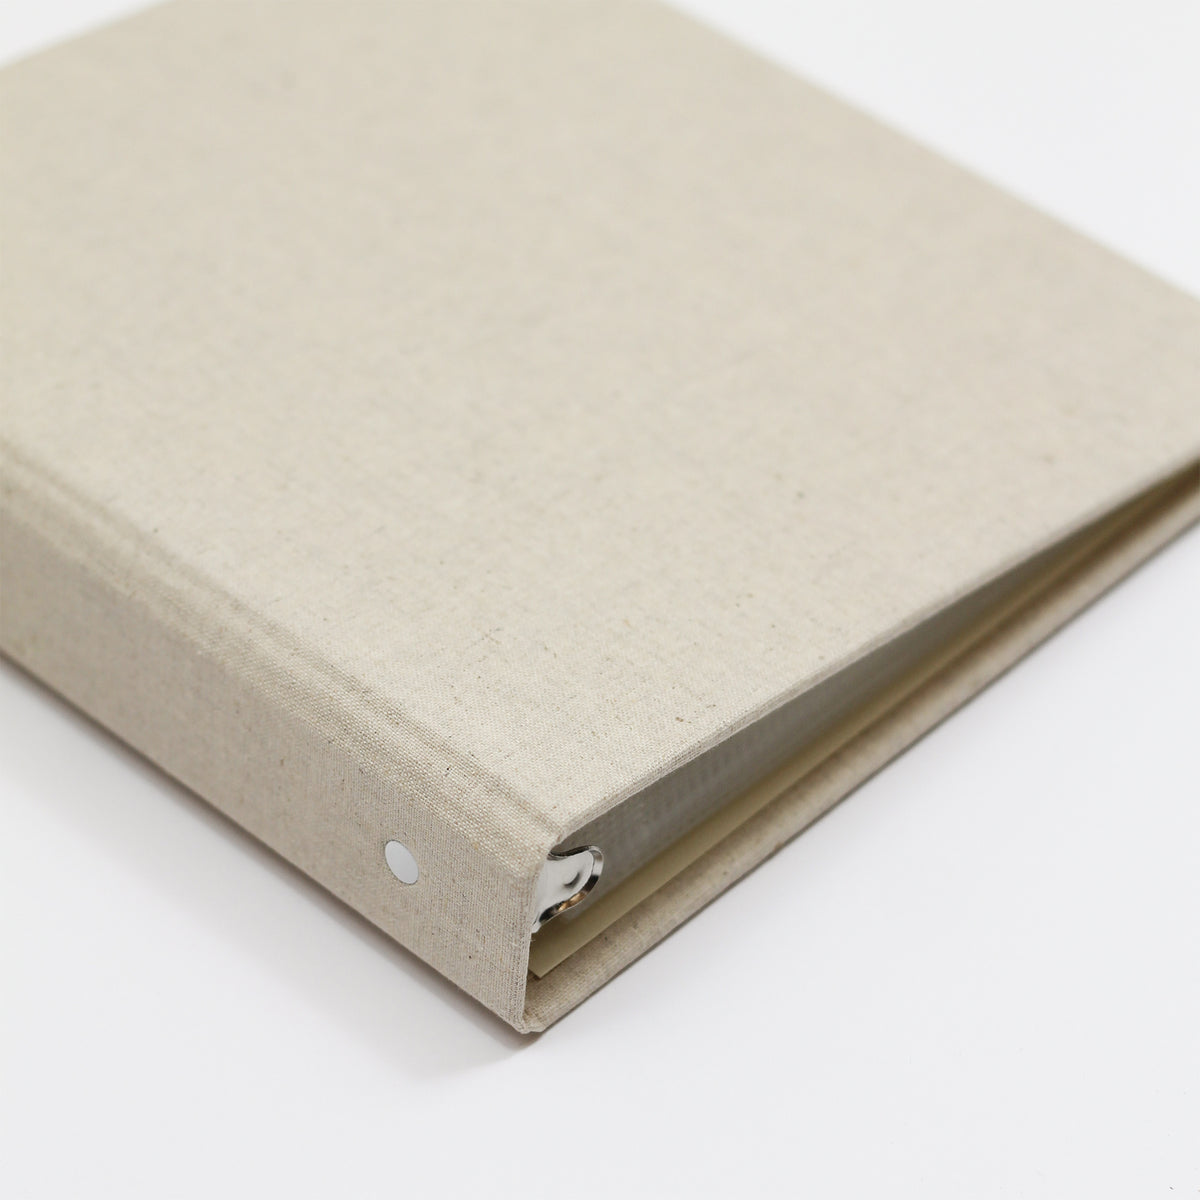 Storage Binder for Photos or Documents with Natural Linen Cover